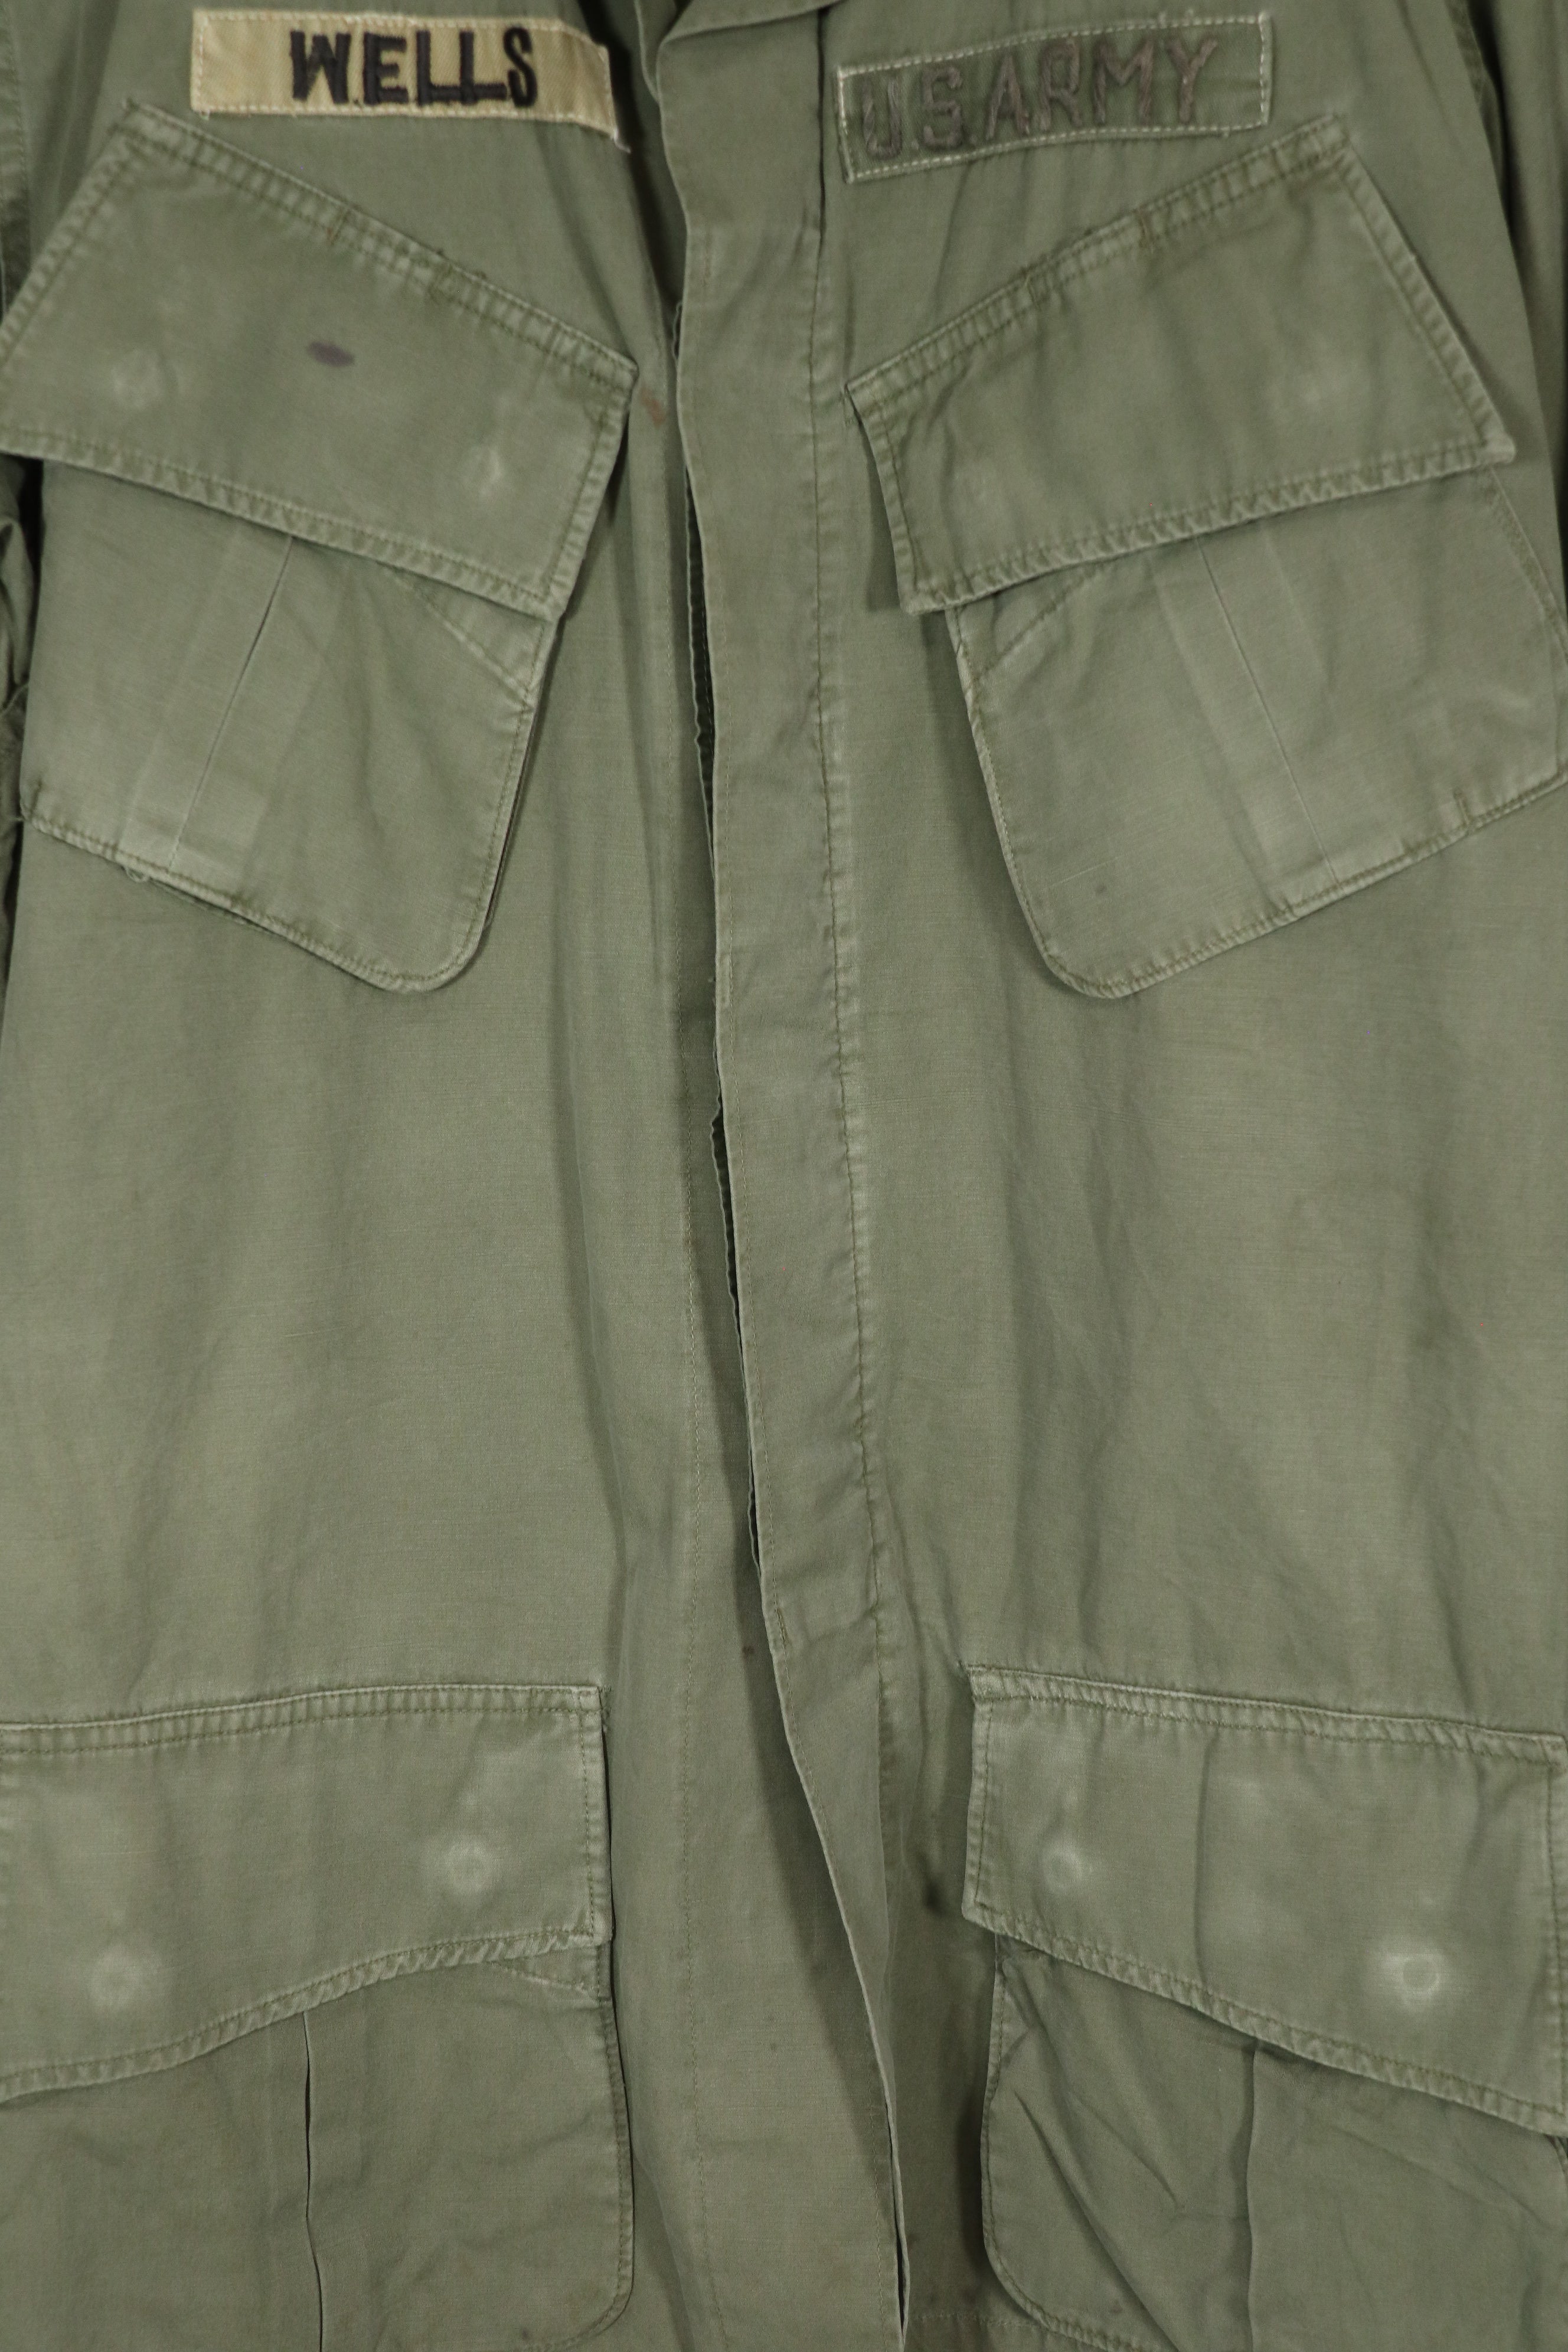 Real 2nd Model Jungle Fatigue Jacket, MACV affiliation, first patch attached, used.